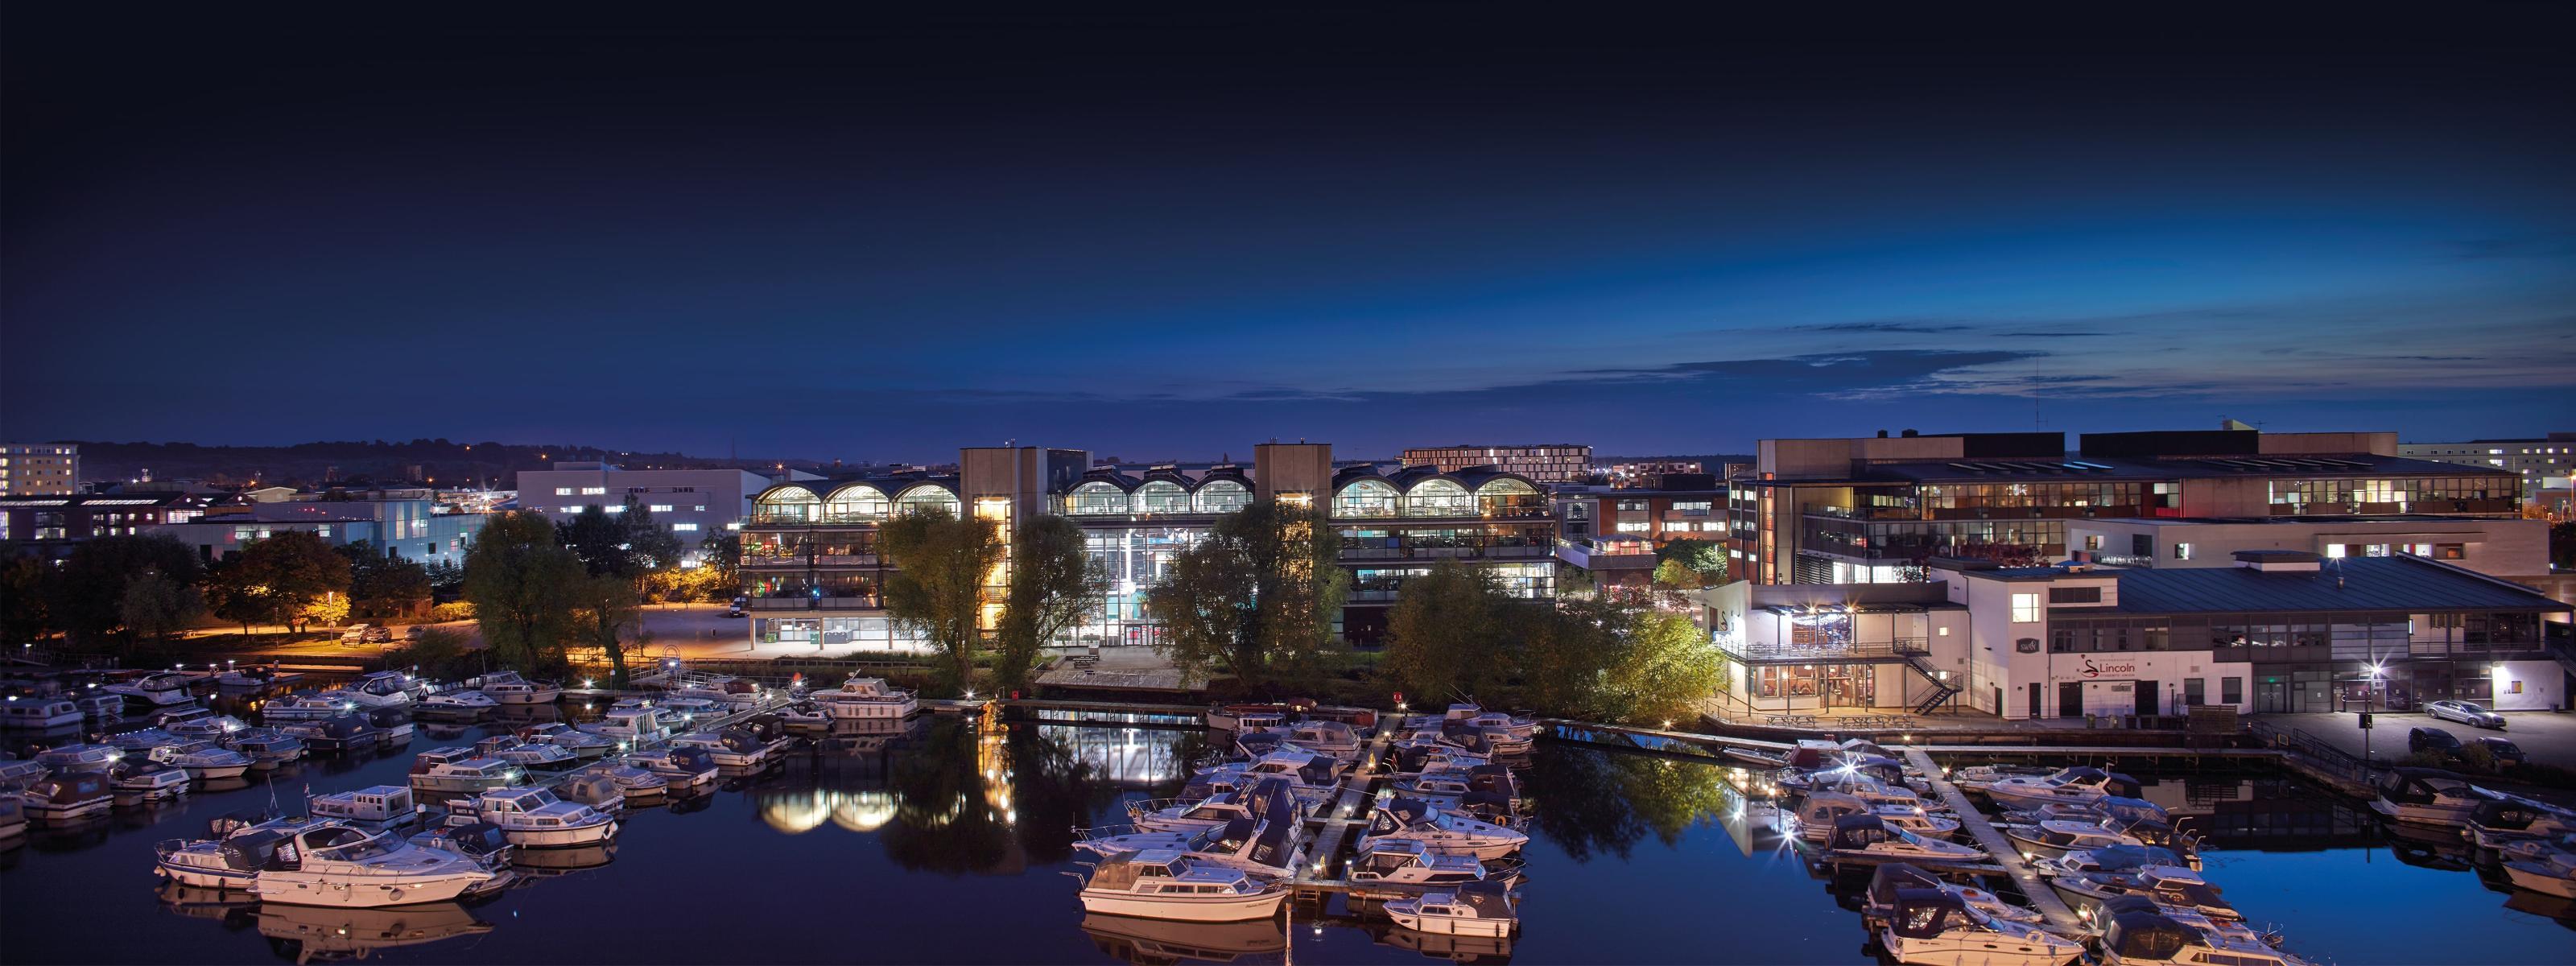 The University of Lincoln's Brayford Campus at night